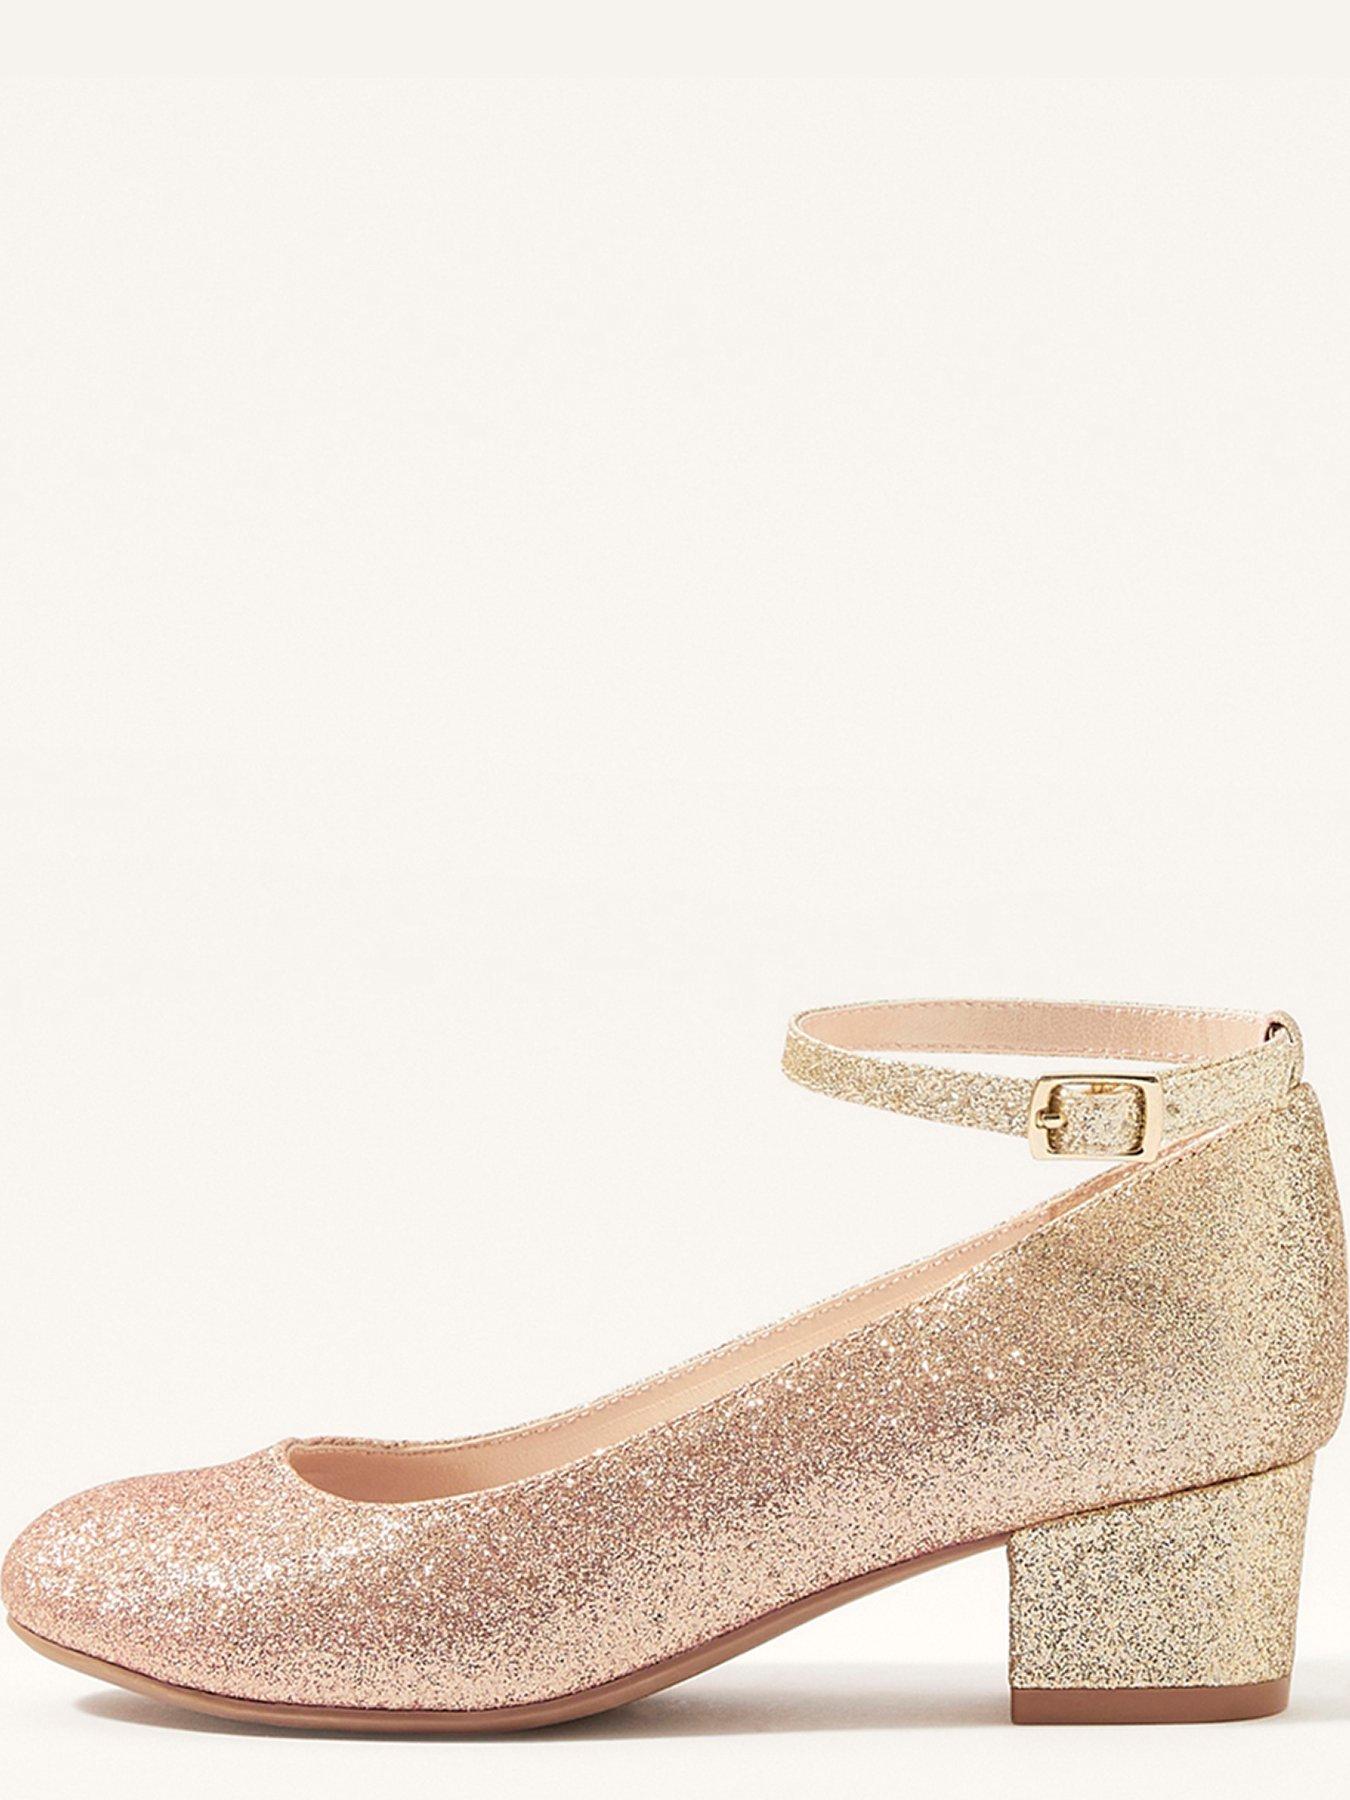 Shoes & boots Girls Ombre Heel Shoes - Pink